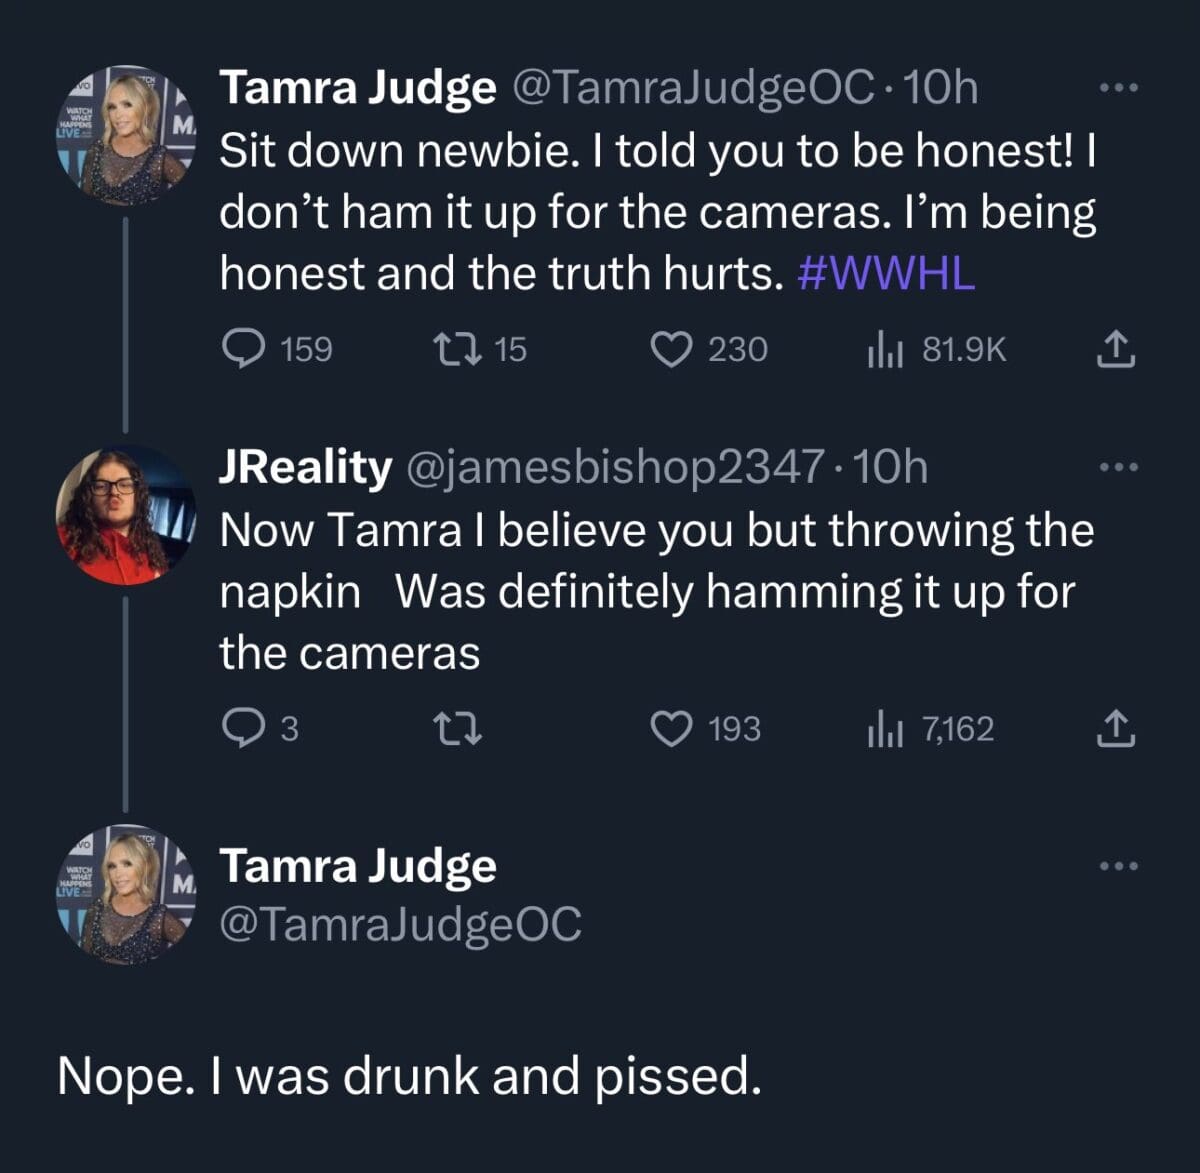 Tamra Judge fires back at Jennifer Pedrant saying she's "drastically different" on camera